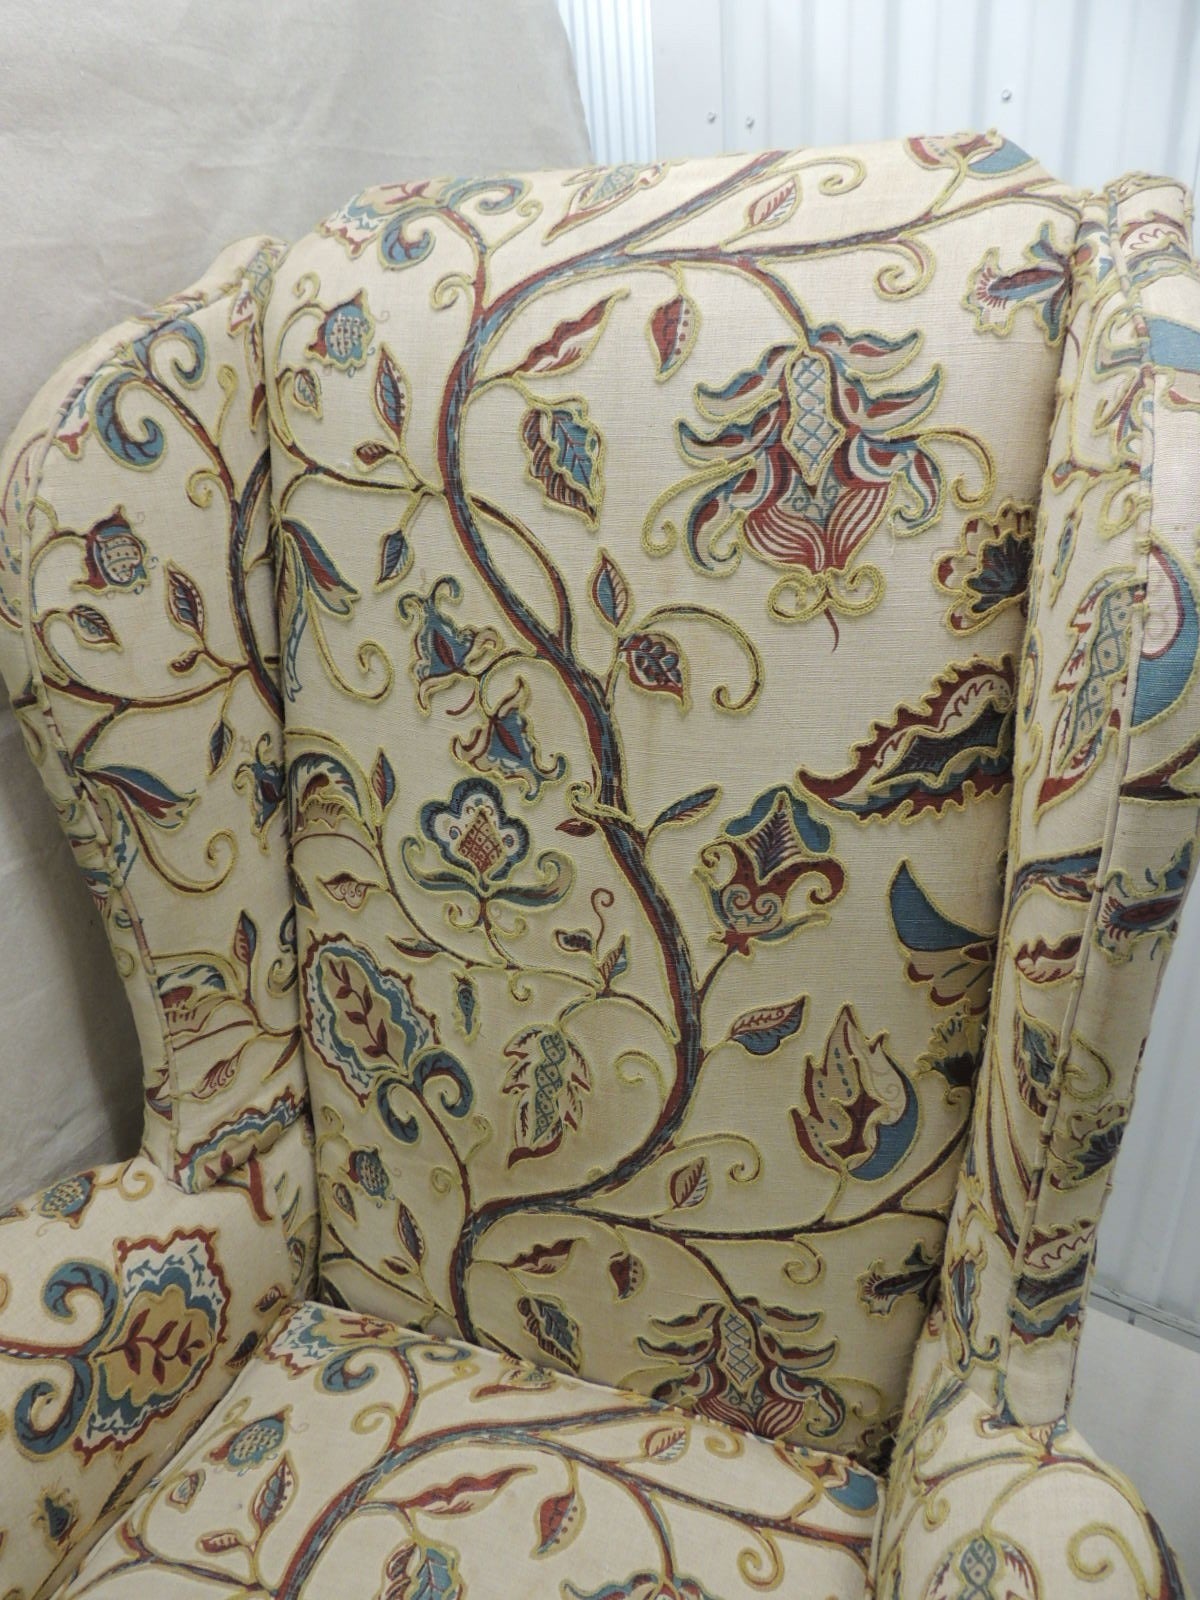 European Wing Chair Upholstered in Crewel Work Embroidery 